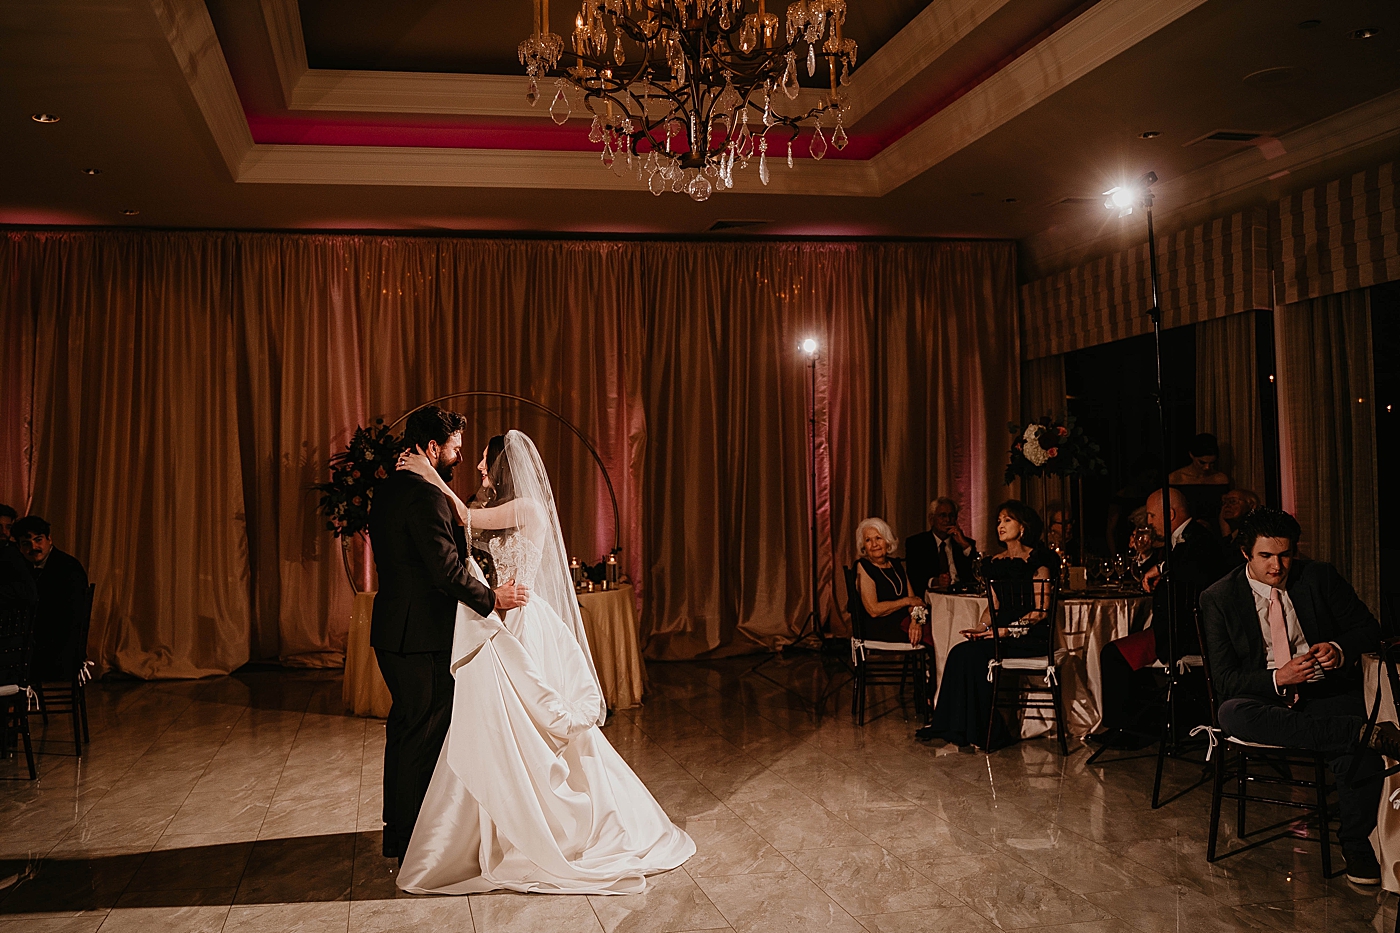 Warm lit first dance Bride and Groom with Family and Friends watching with vintage chandelier Romantic Winter Wedding captured NYC Wedding Planner Poppy and Lynn